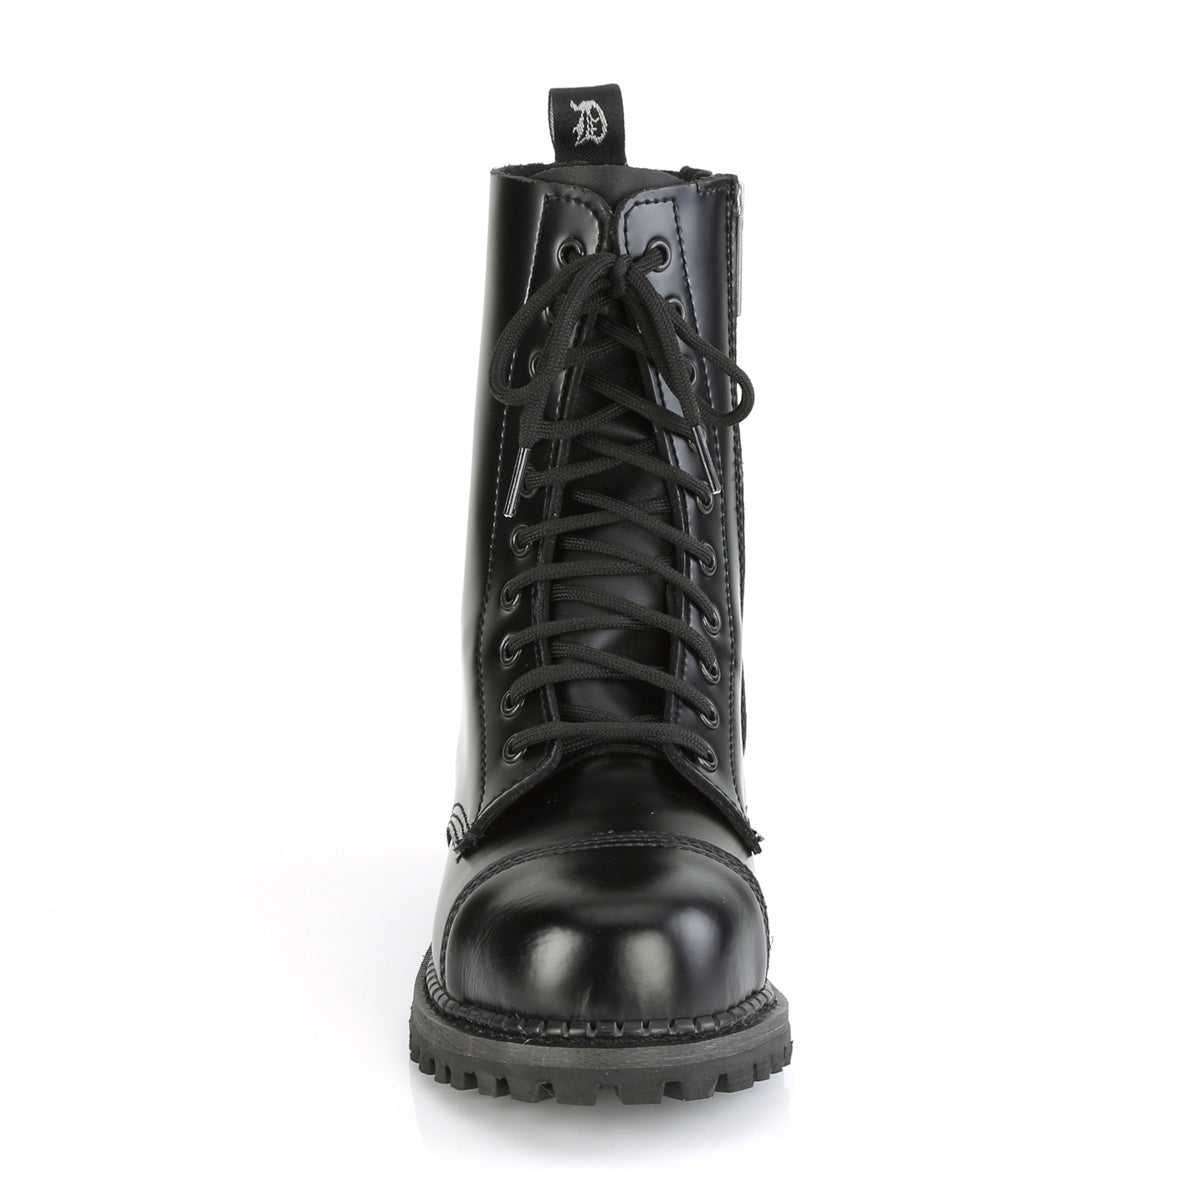 RIOT-10 Black Leather Ankle Boot Demonia